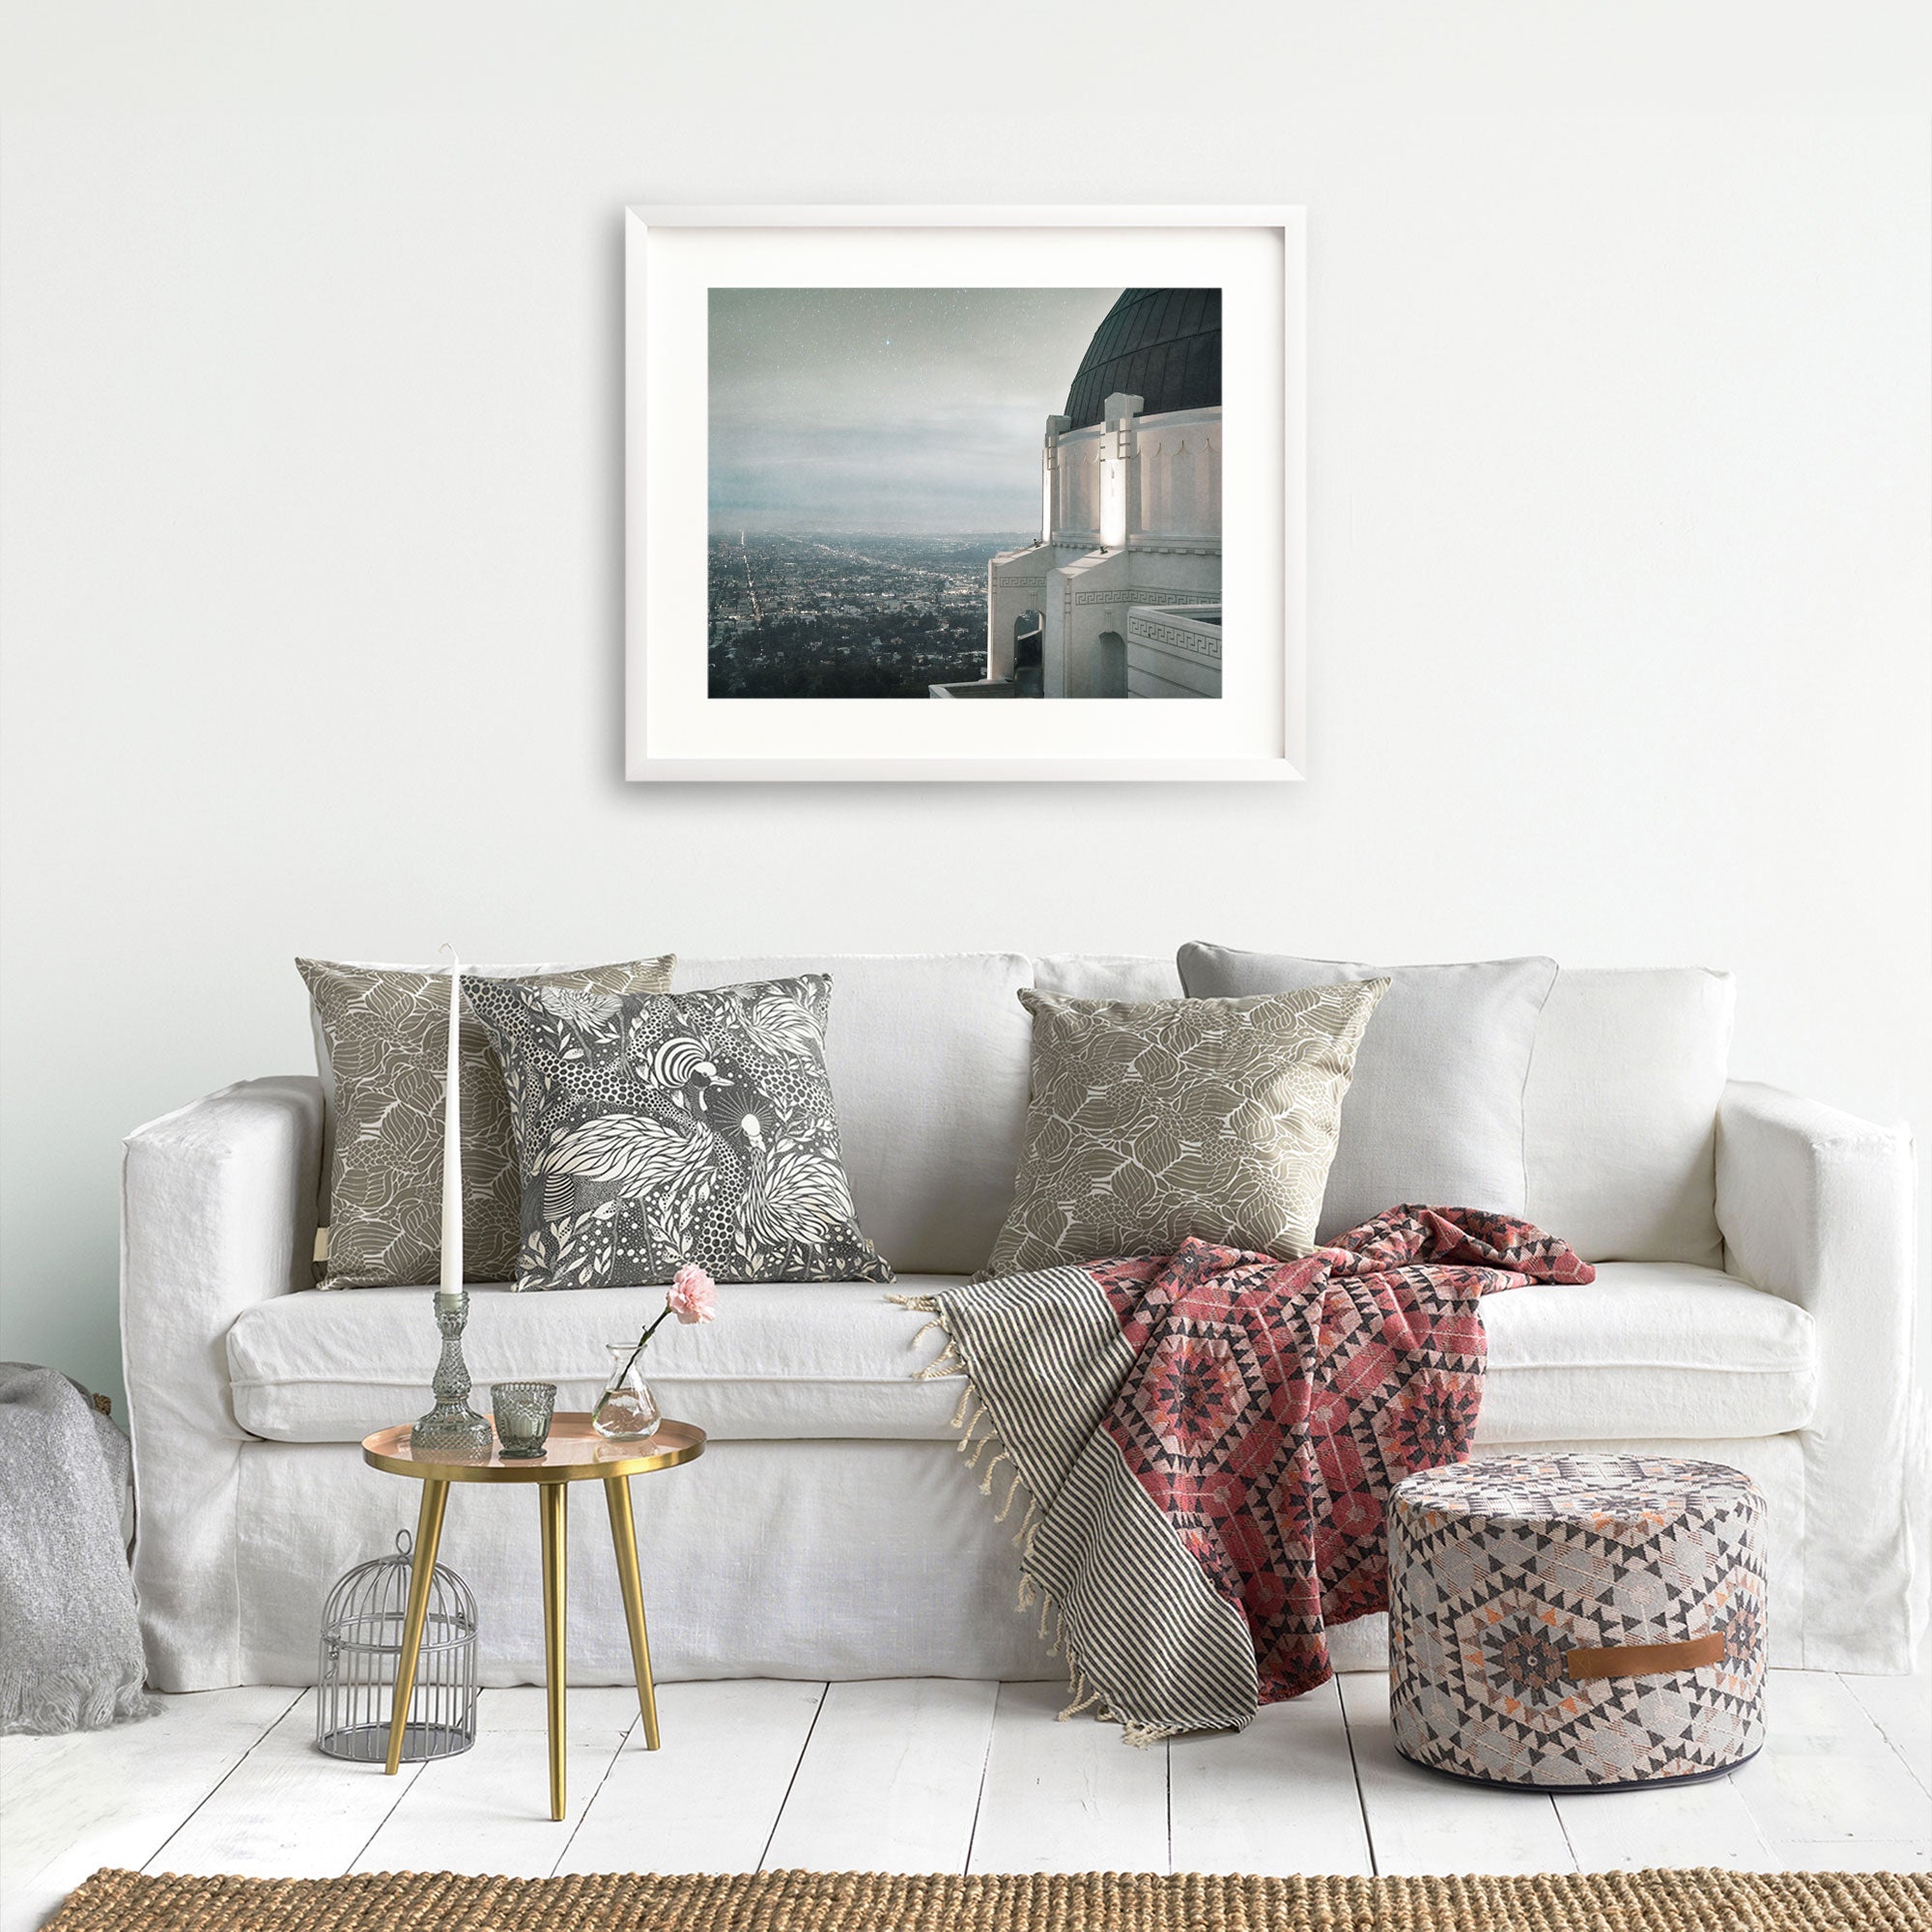 A minimalist living room featuring a white sofa adorned with patterned pillows, a small metallic side table with decor, a woven pouf, and an Offley Green archival photograph print of Griffith Observatory ('The Sky At Night') hanging on the wall.